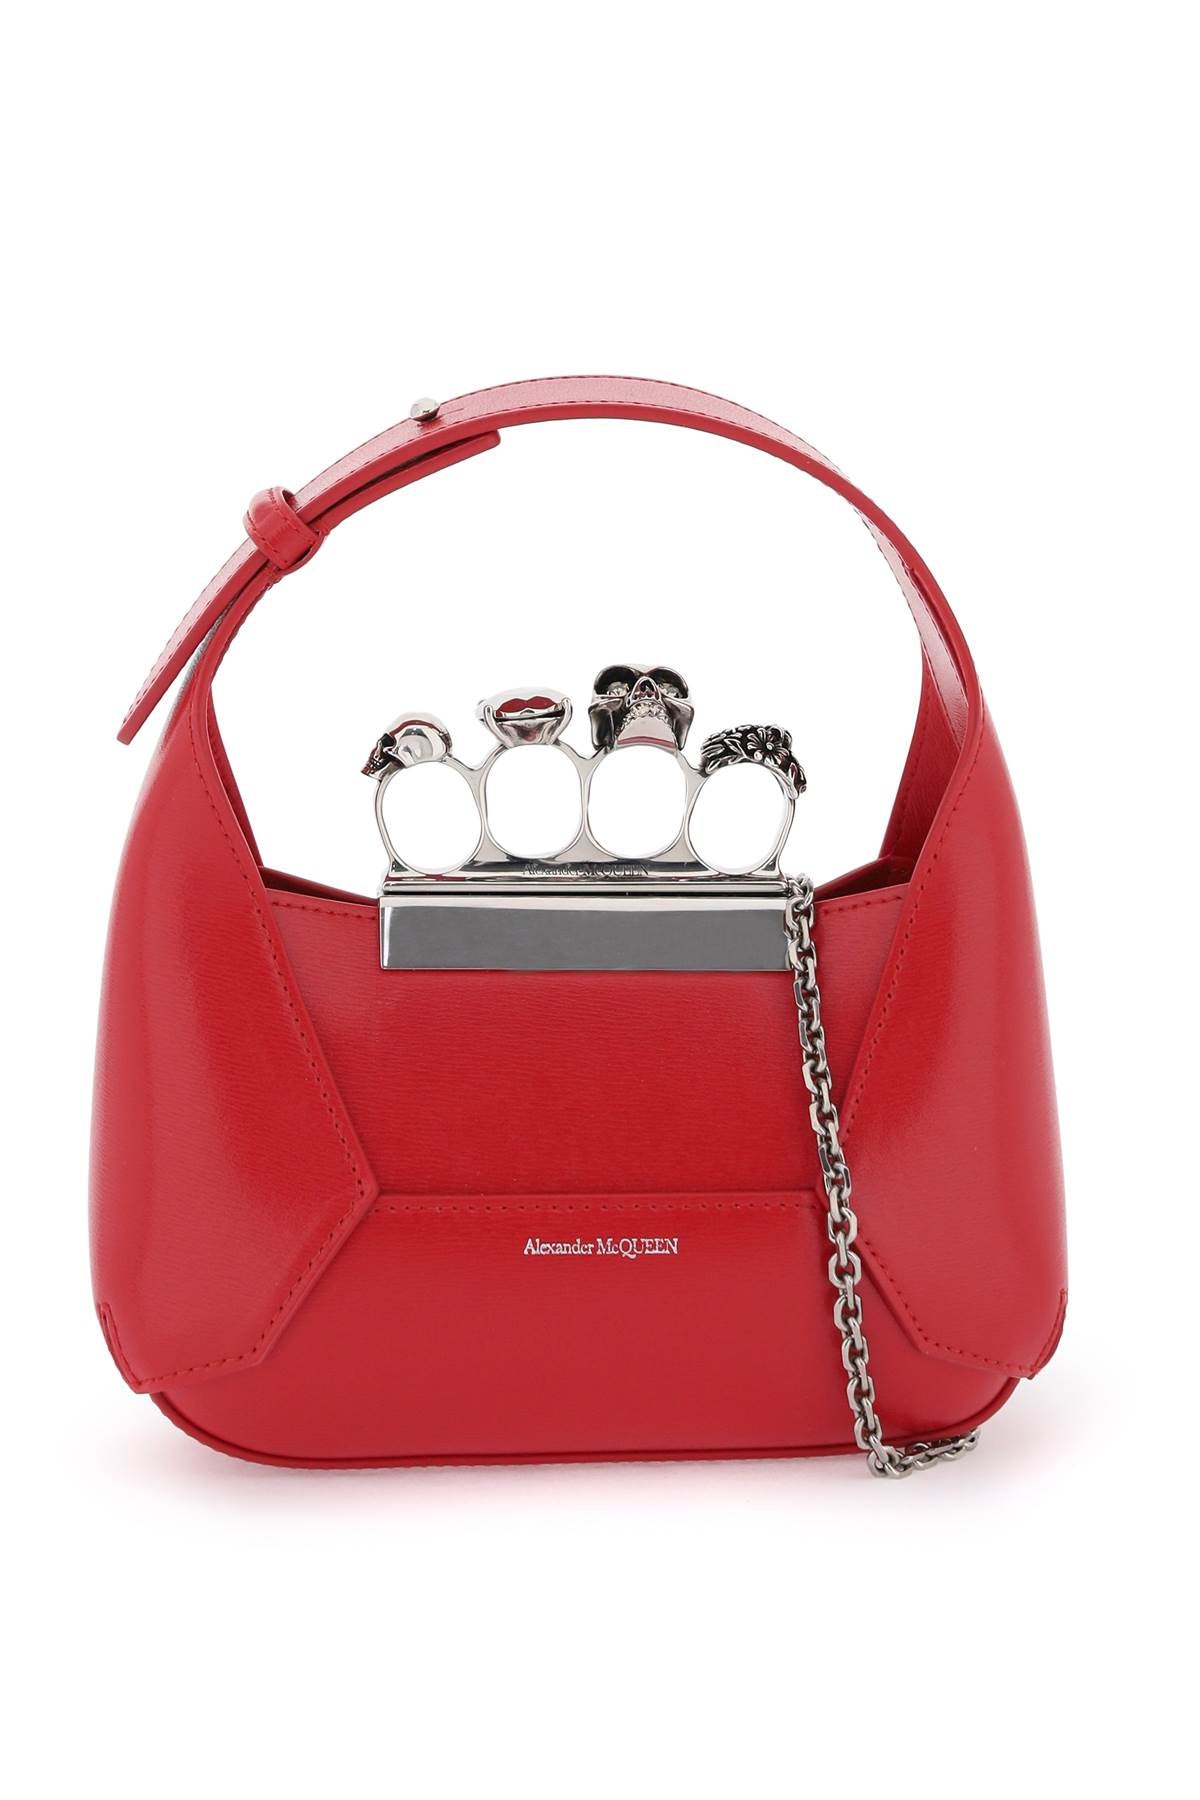 Alexander mcqueen 'the jewelled hobo' mini bag 731136 DYTAB WELSH RED